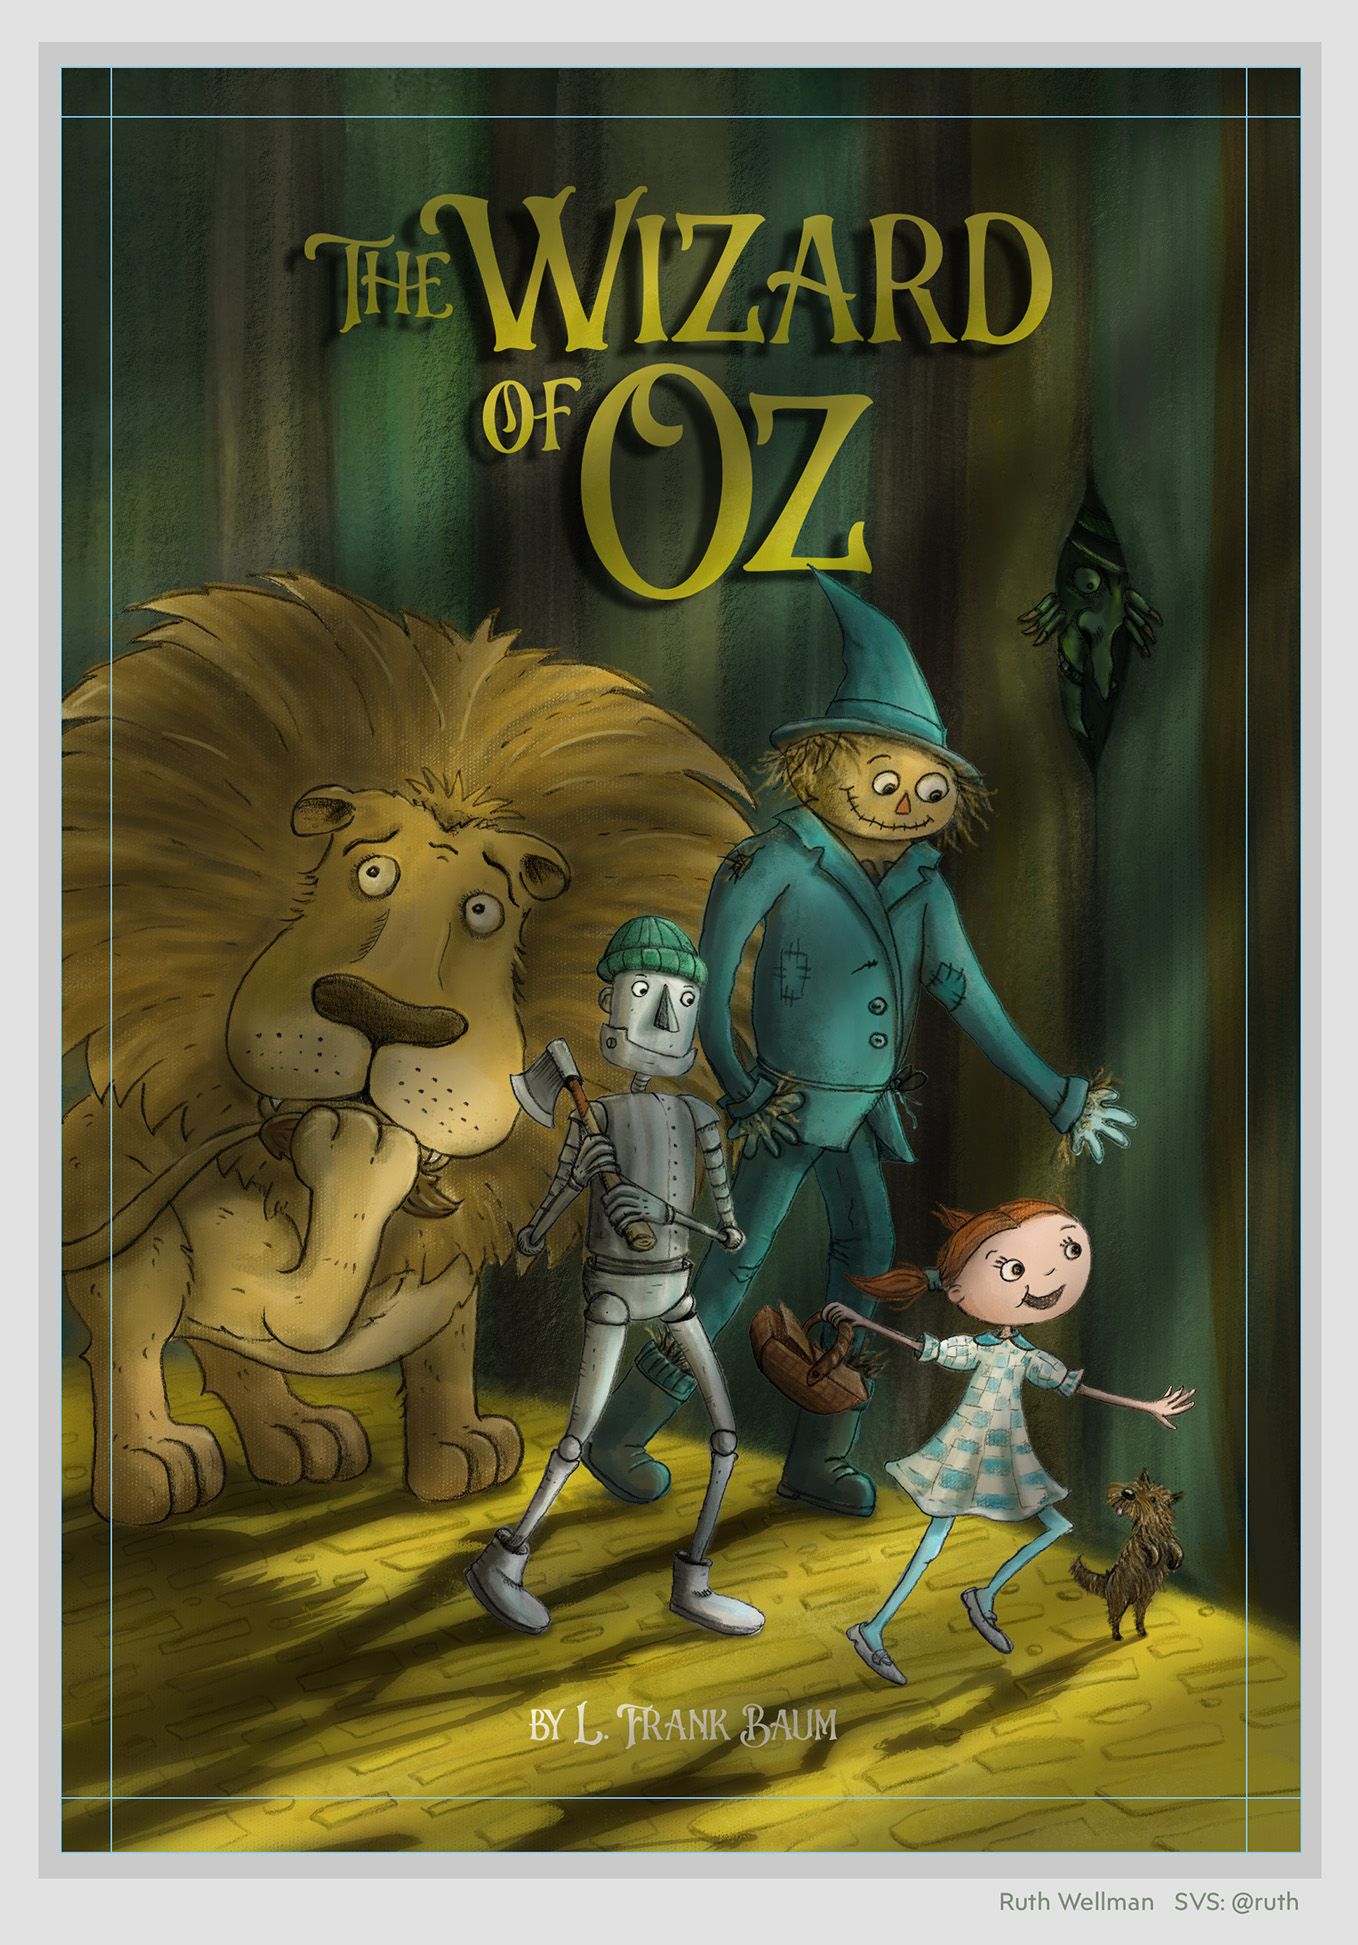 SVS-The-Wizard-of-Oz-cover-ruth.jpg